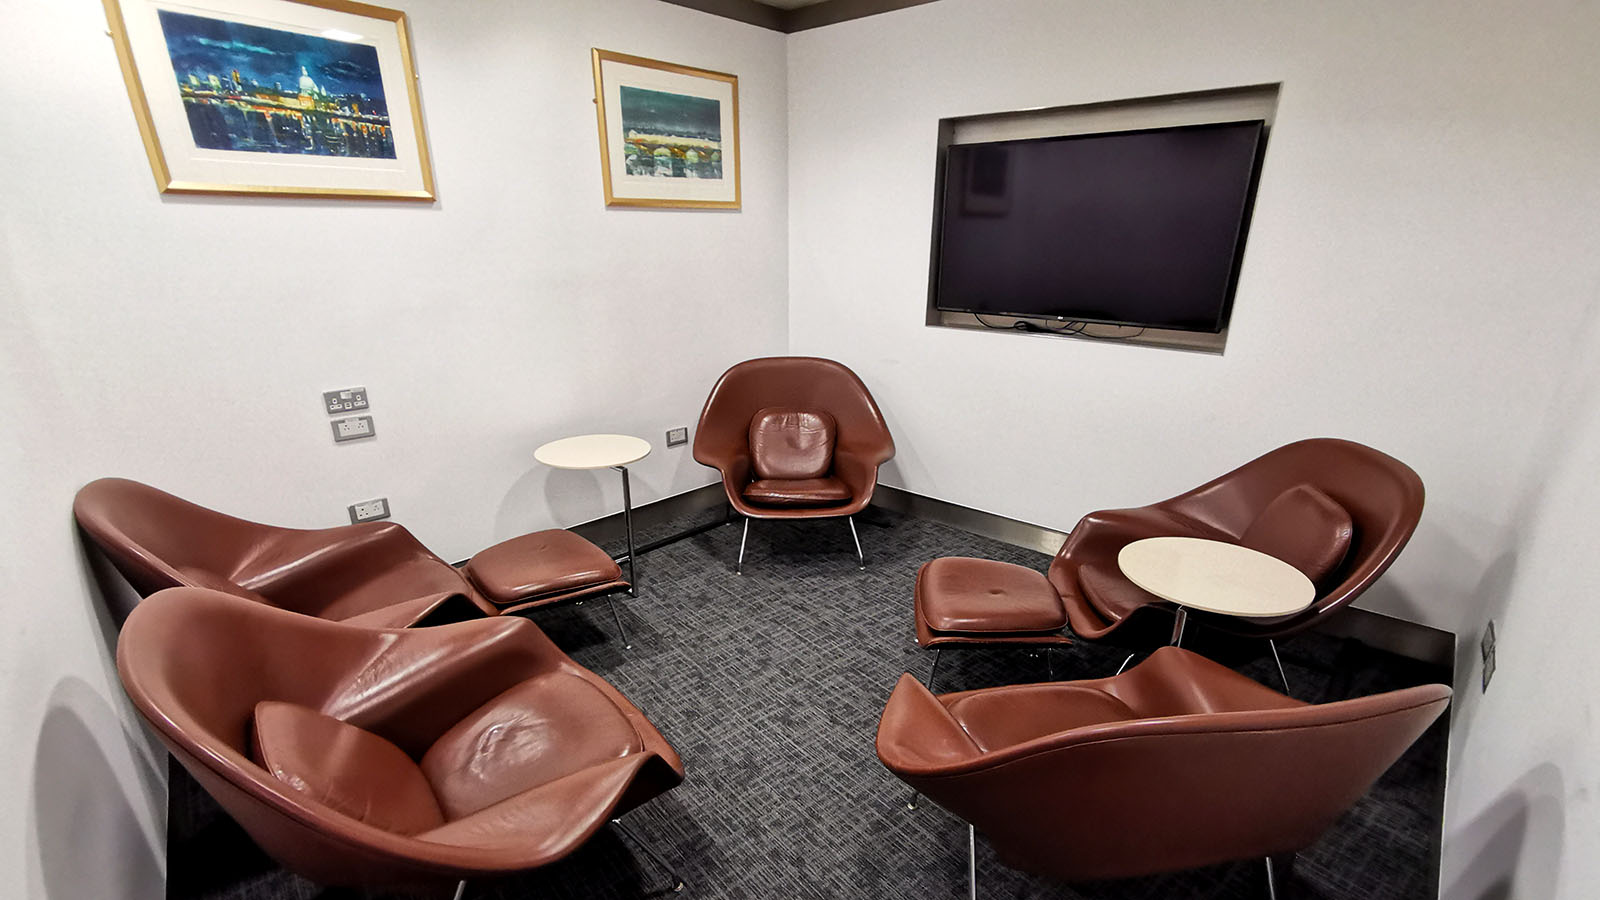 Meeting room in the American Airlines International First Class Lounge, London Heathrow